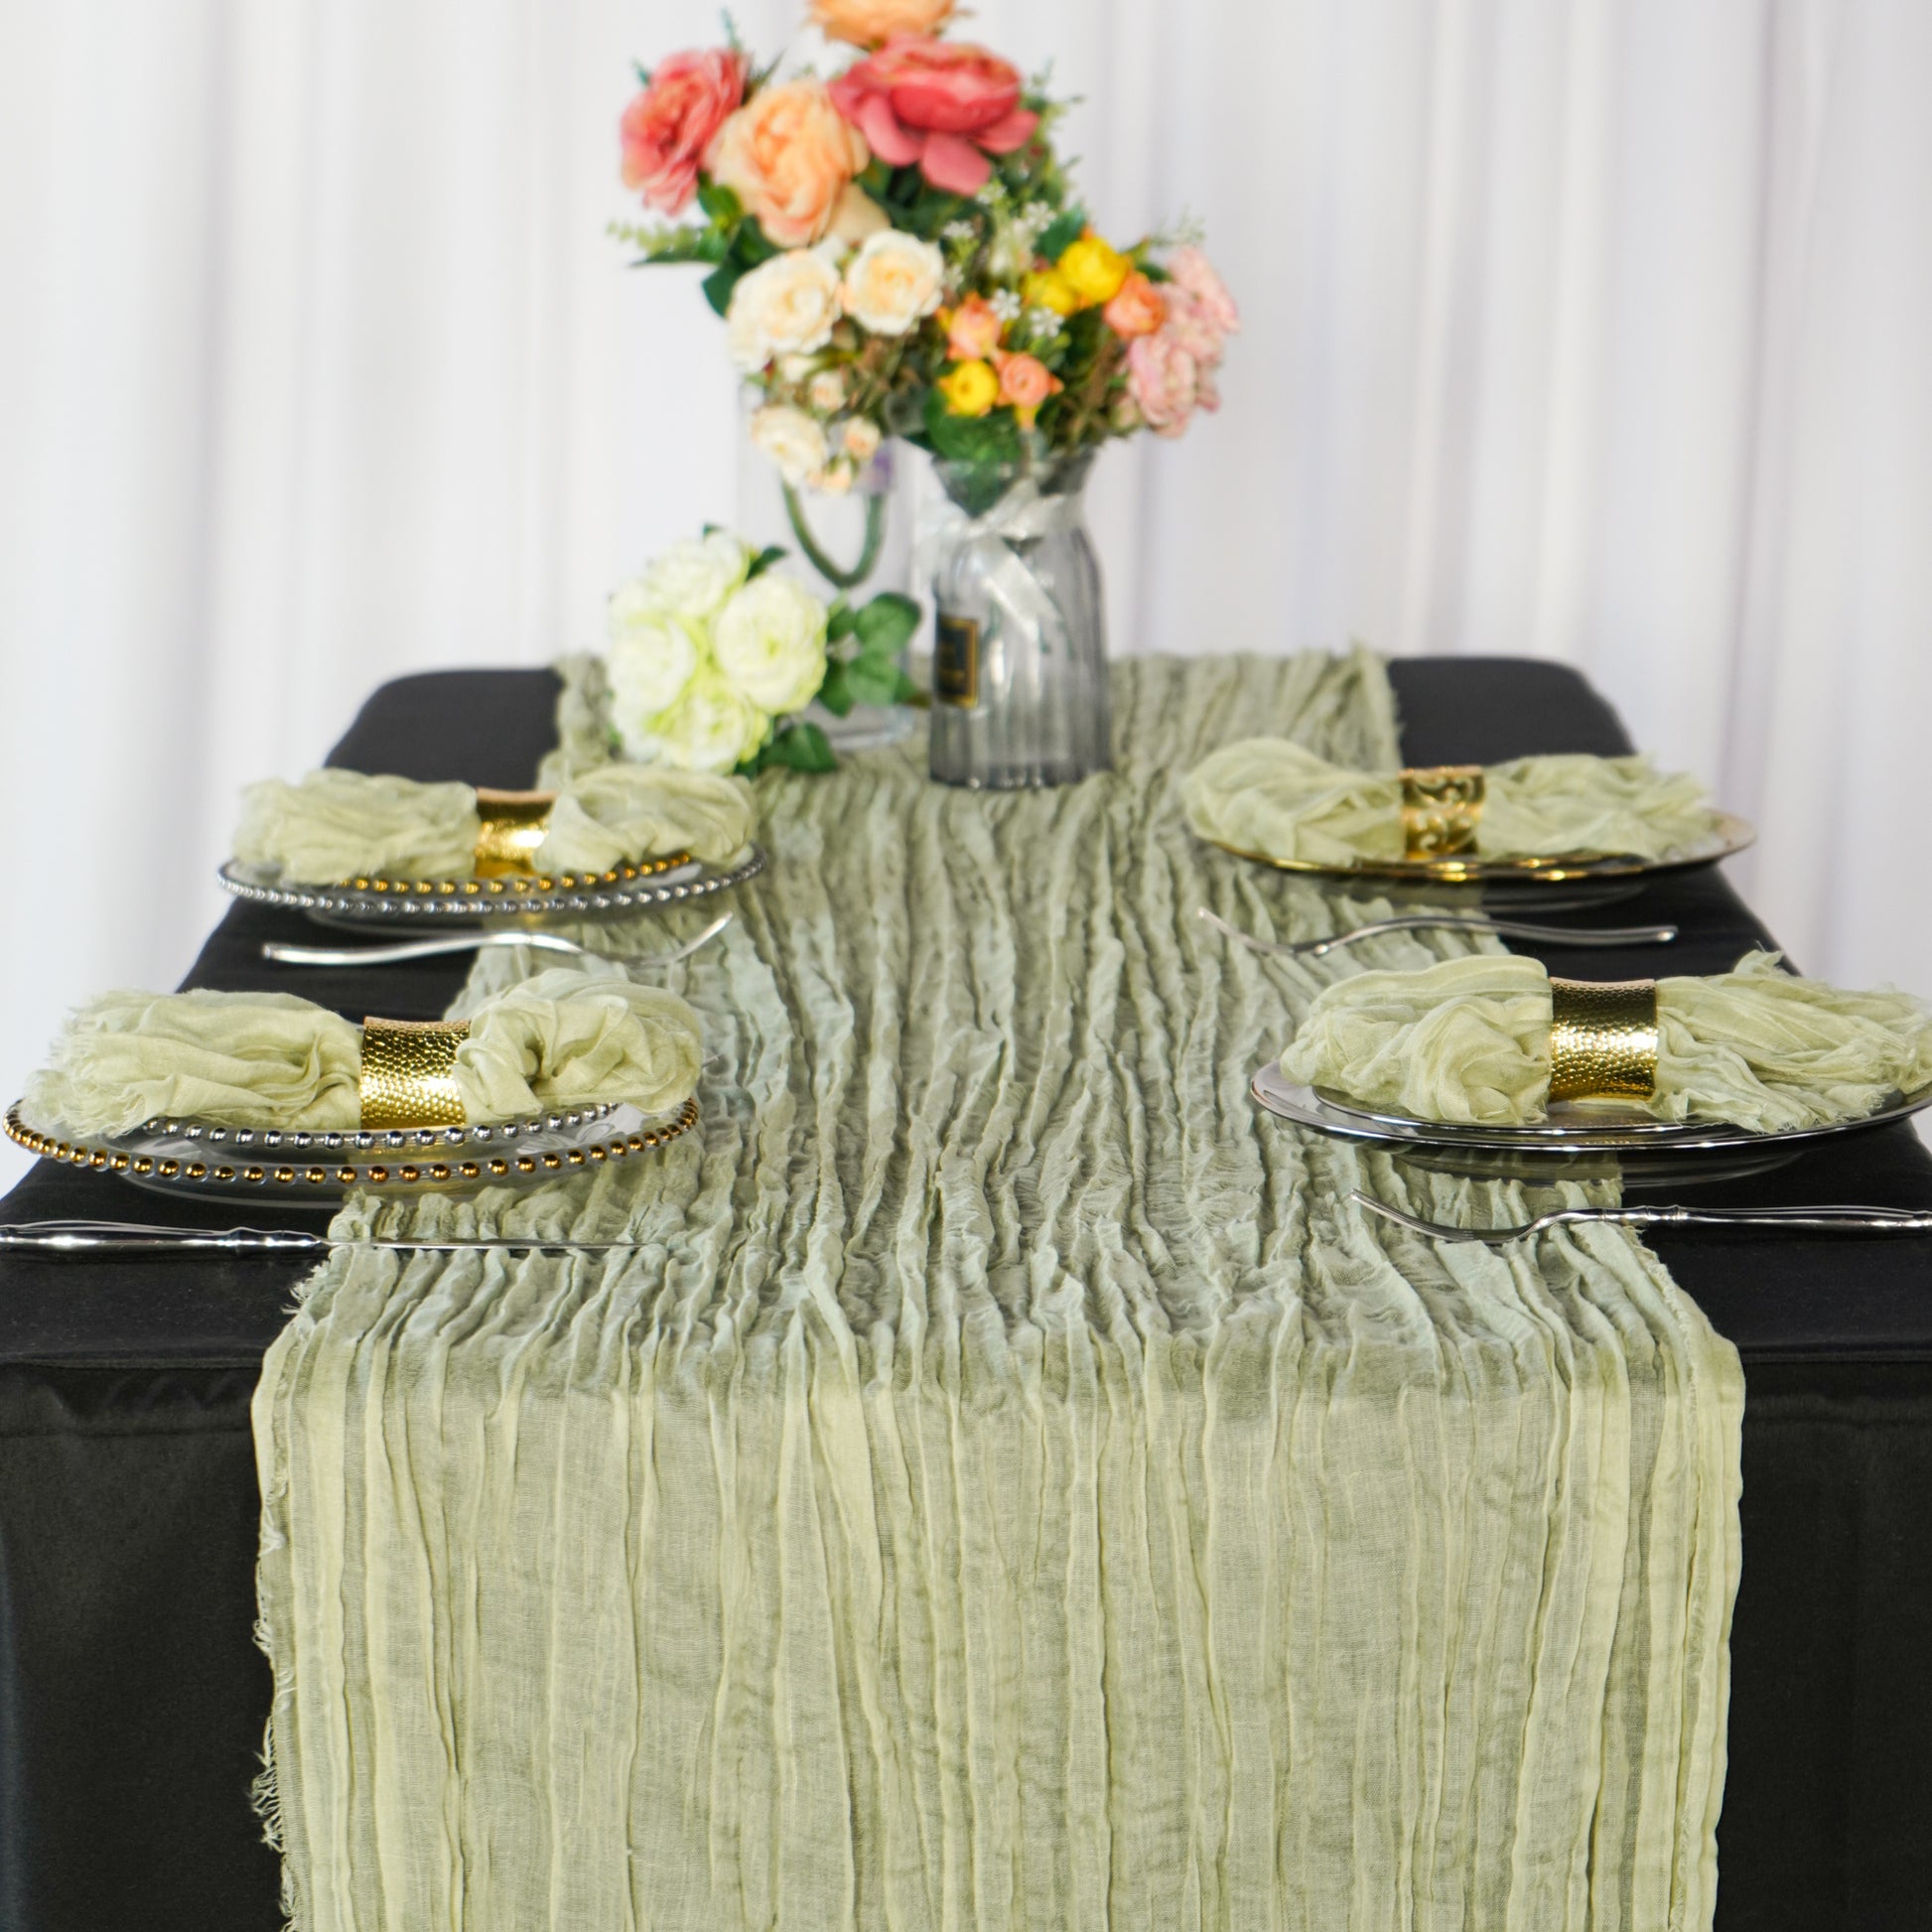 Premium Cheesecloth Table Runner 16FT x 25" - Sage Green